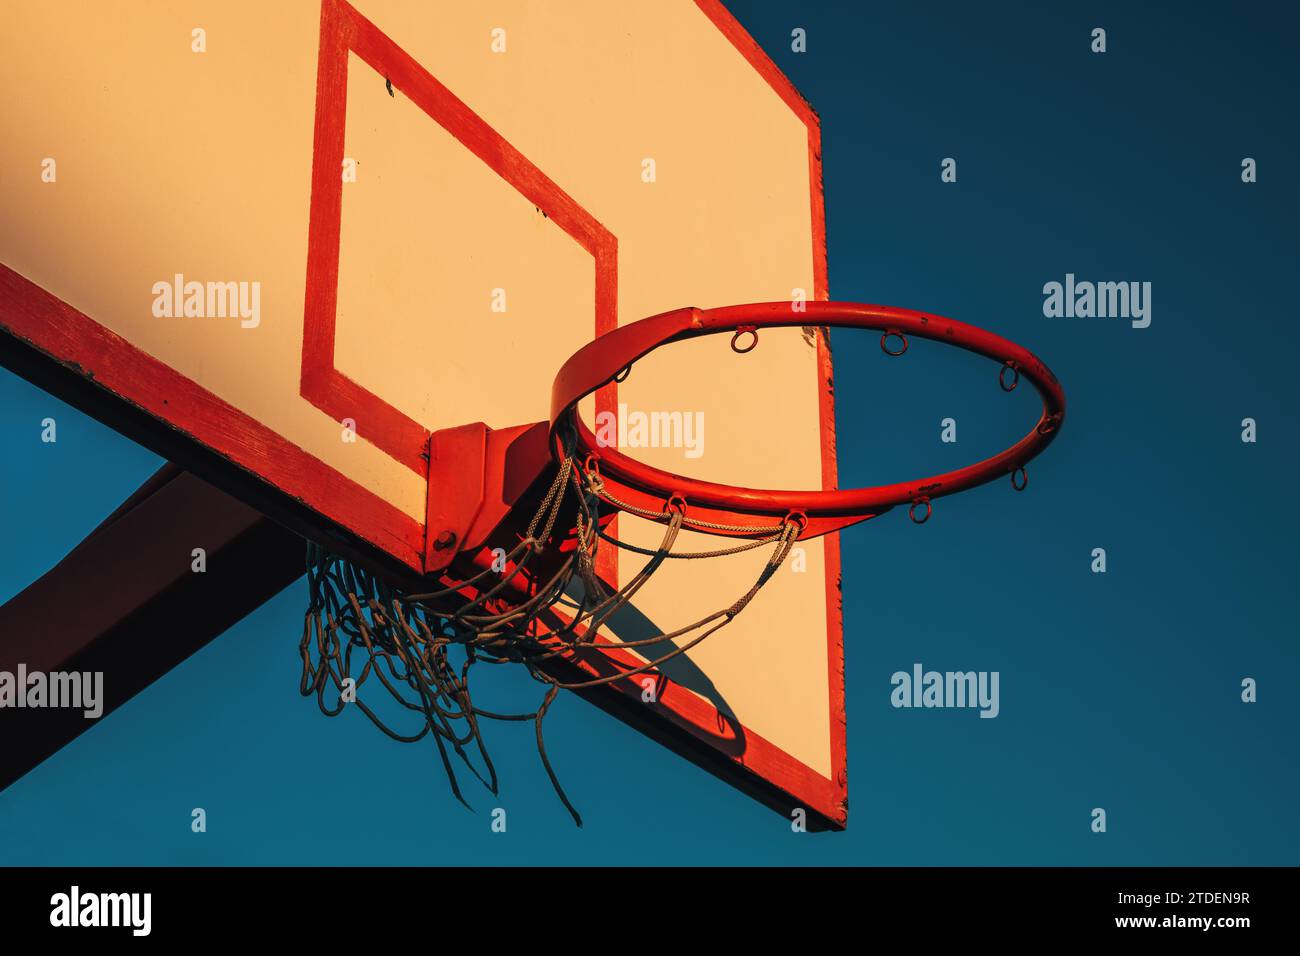 Outdoor basketball board with hoops and torn net in sunset with blue sky in background Stock Photo